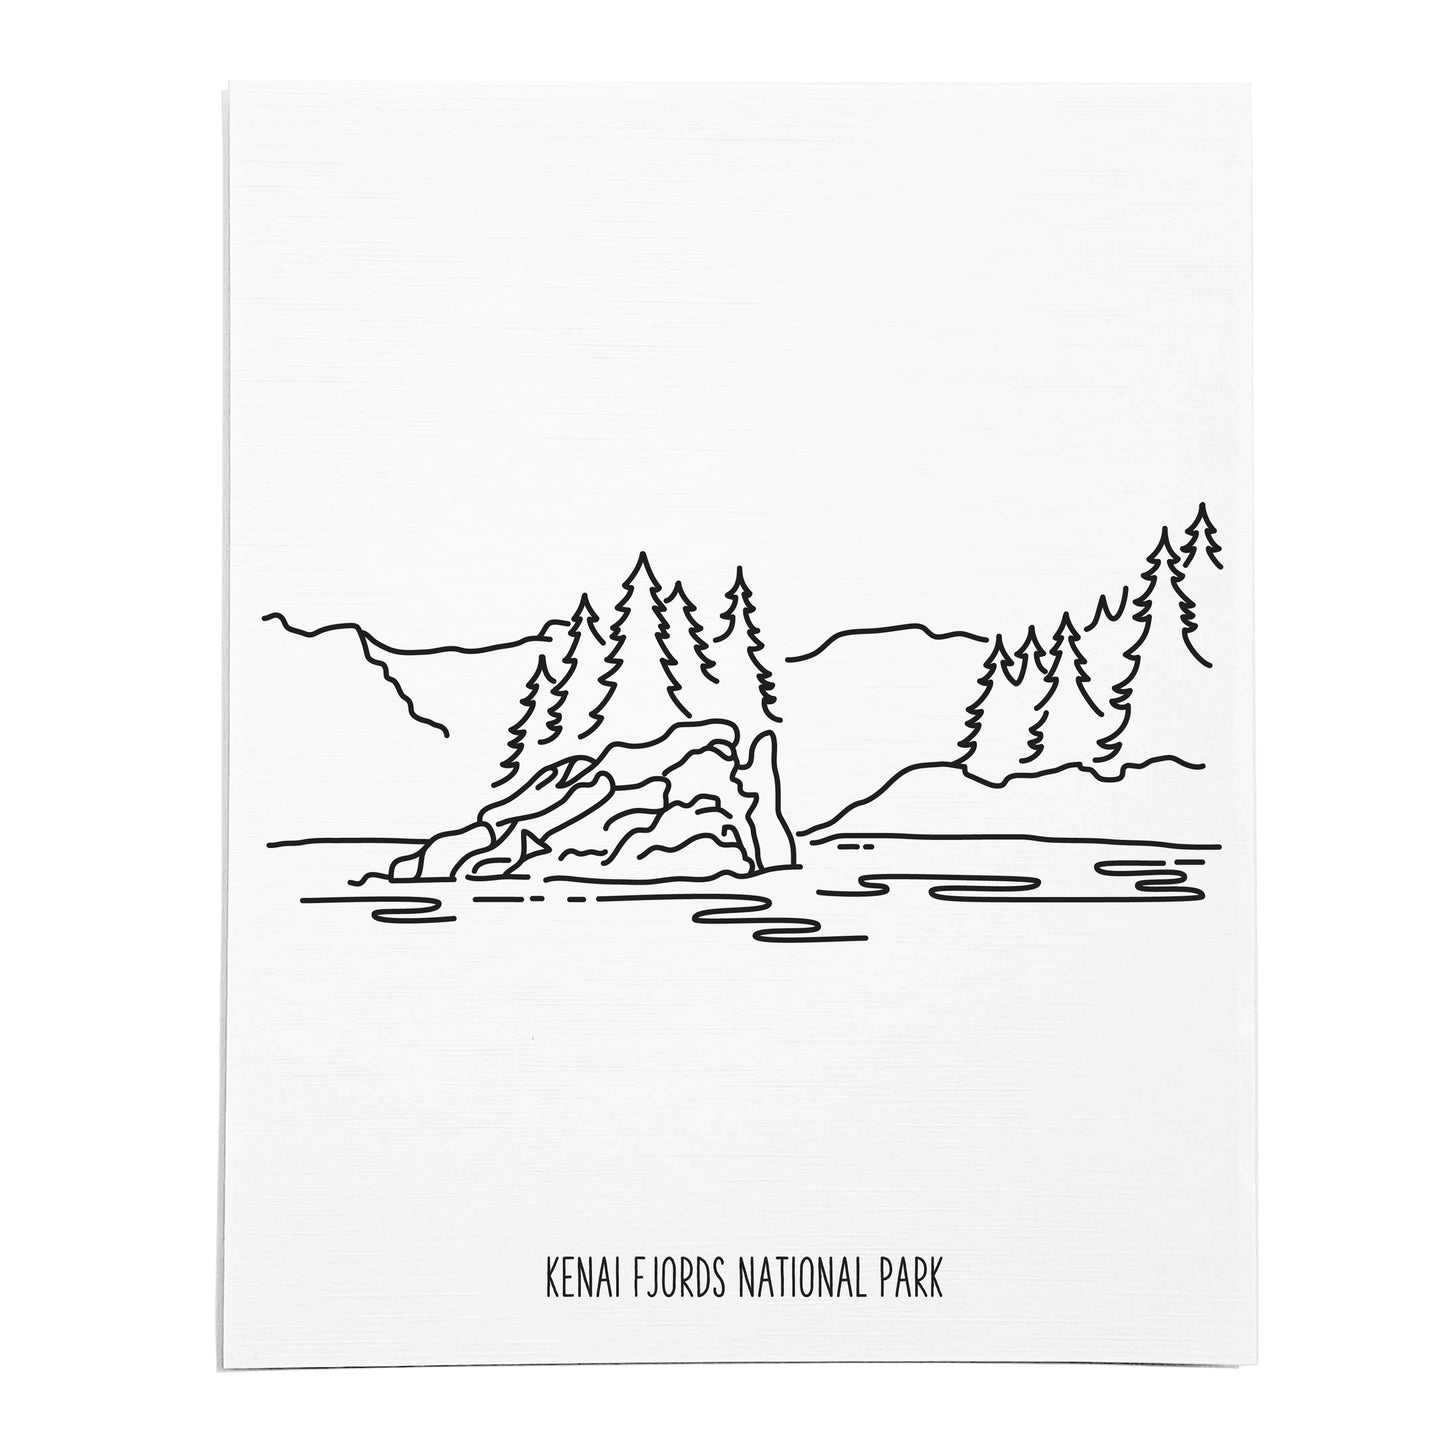 An art print featuring a line drawing of Kenai Fjords National Park on white linen paper